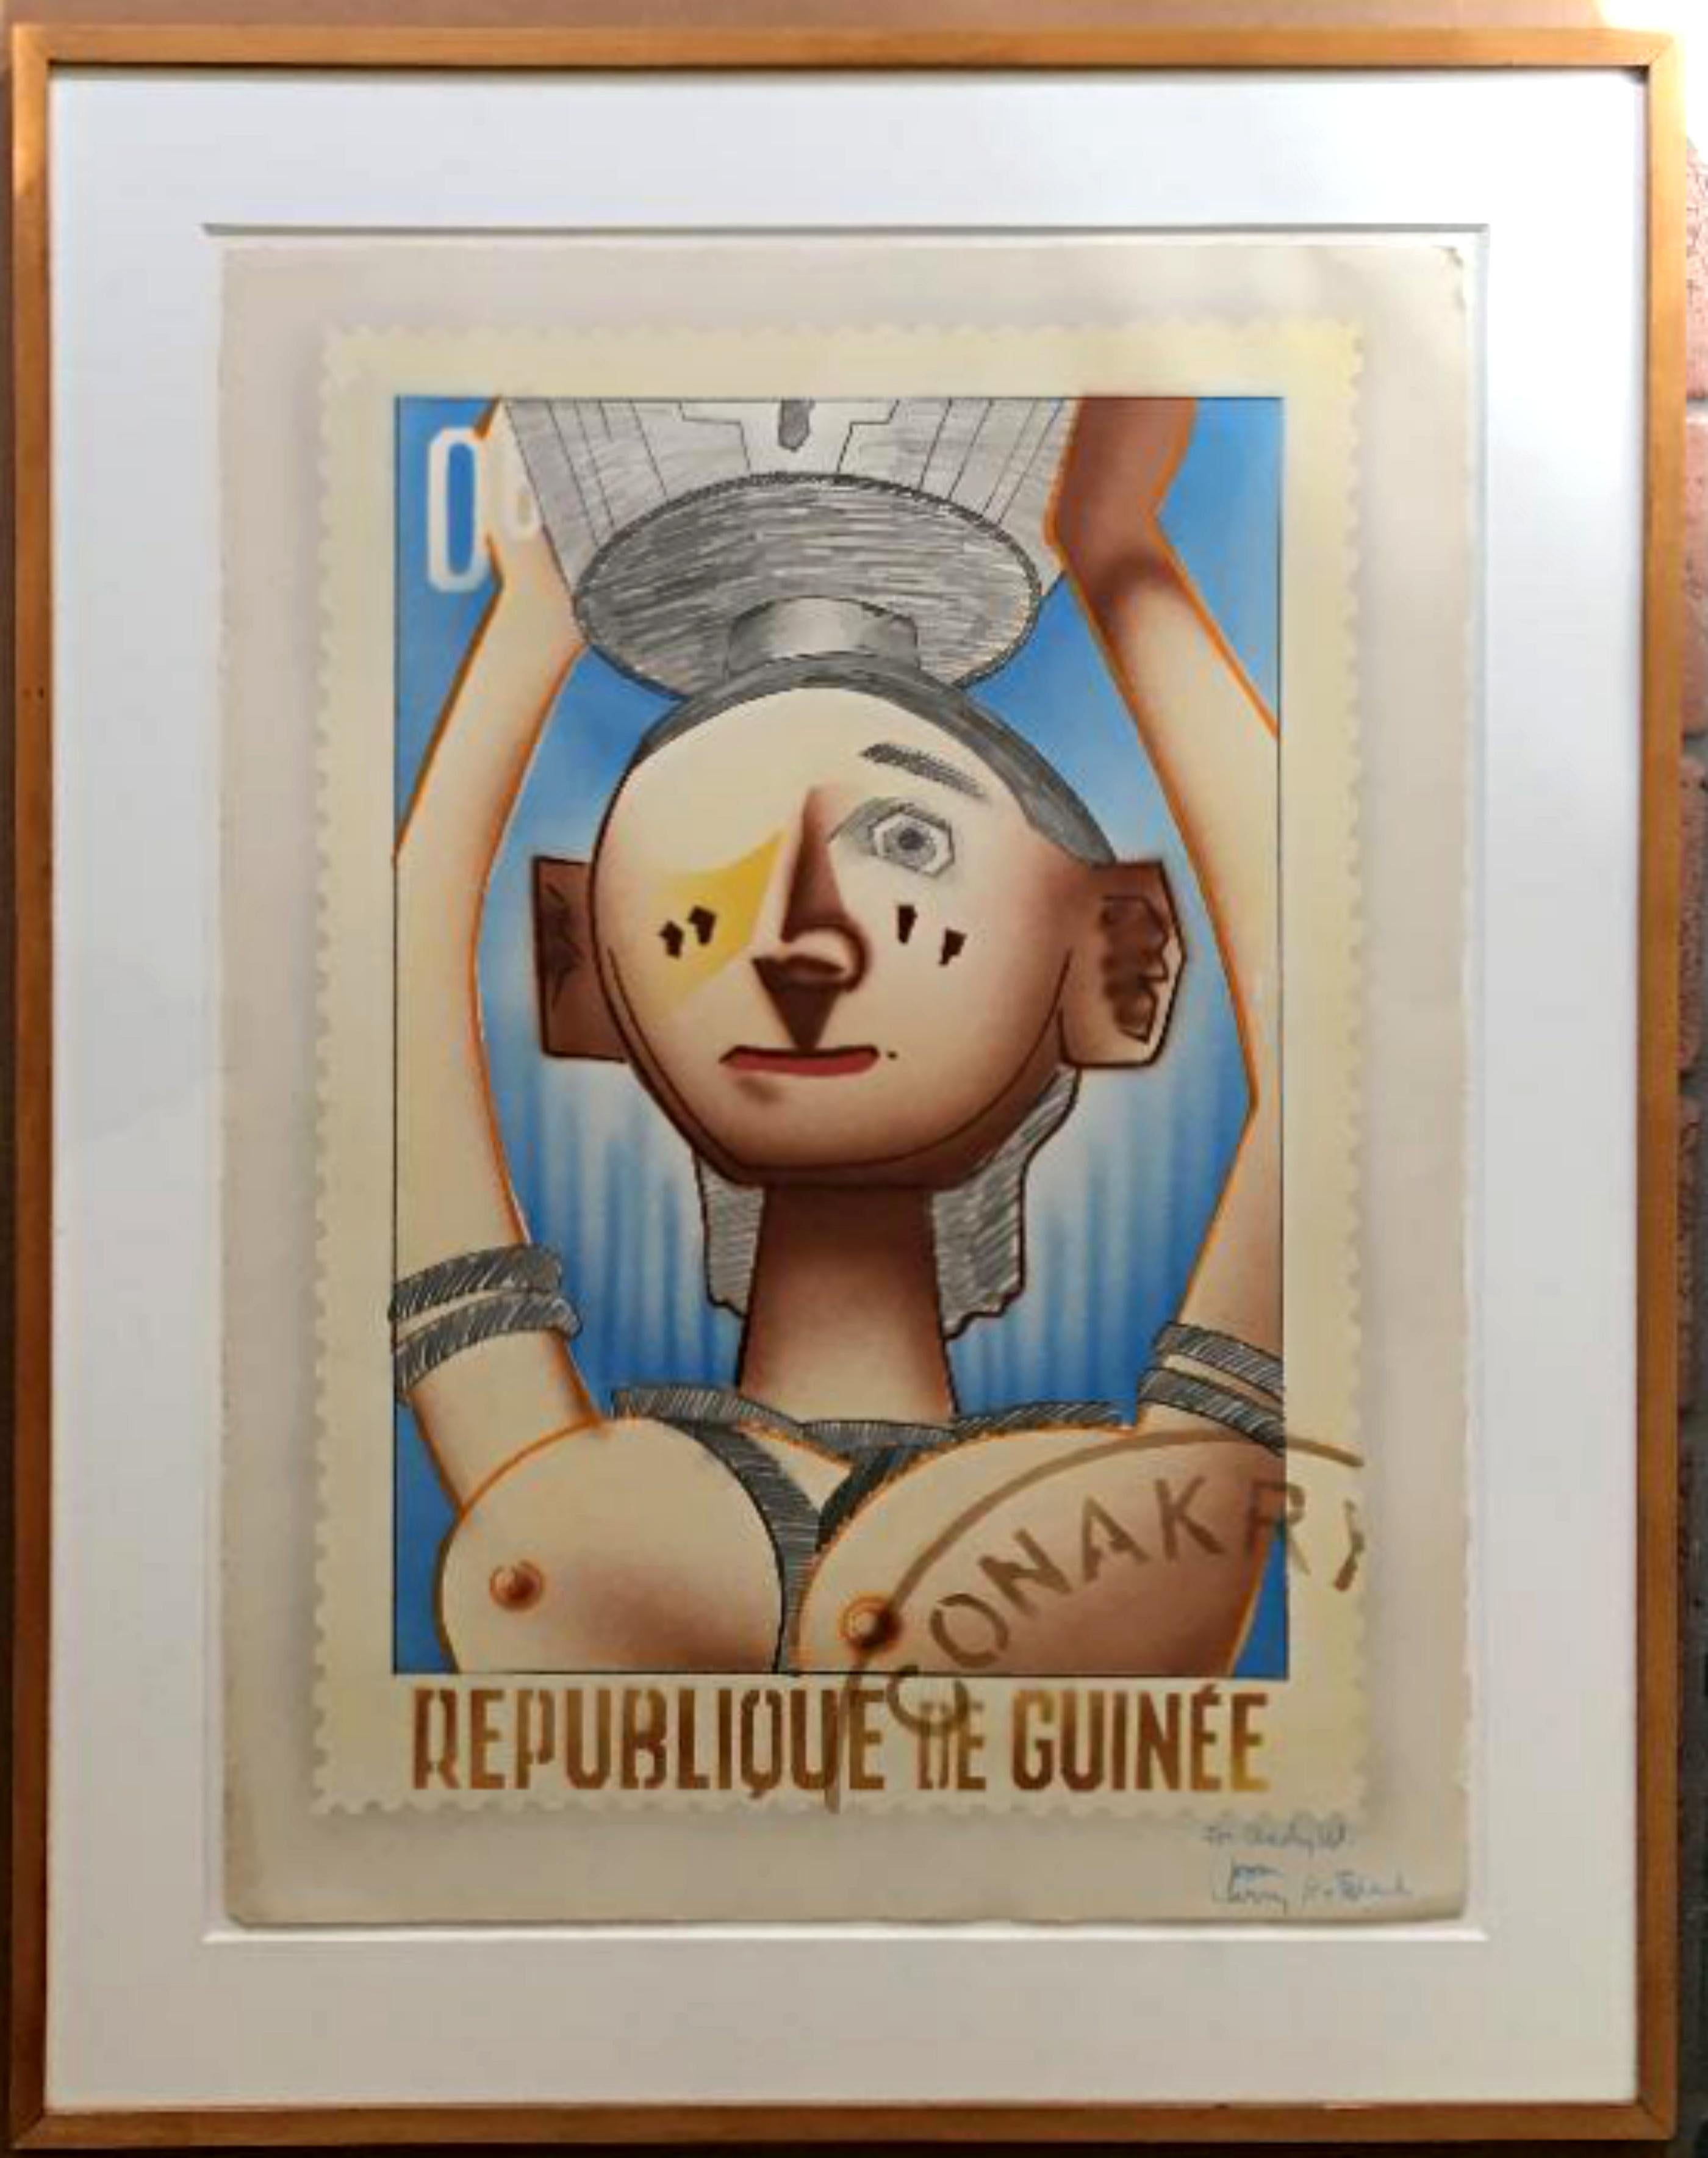 Republique De Guinee, for Andy Warhol, Inscribed in ink to Andy Warhol - Pop Art Print by Larry Rivers